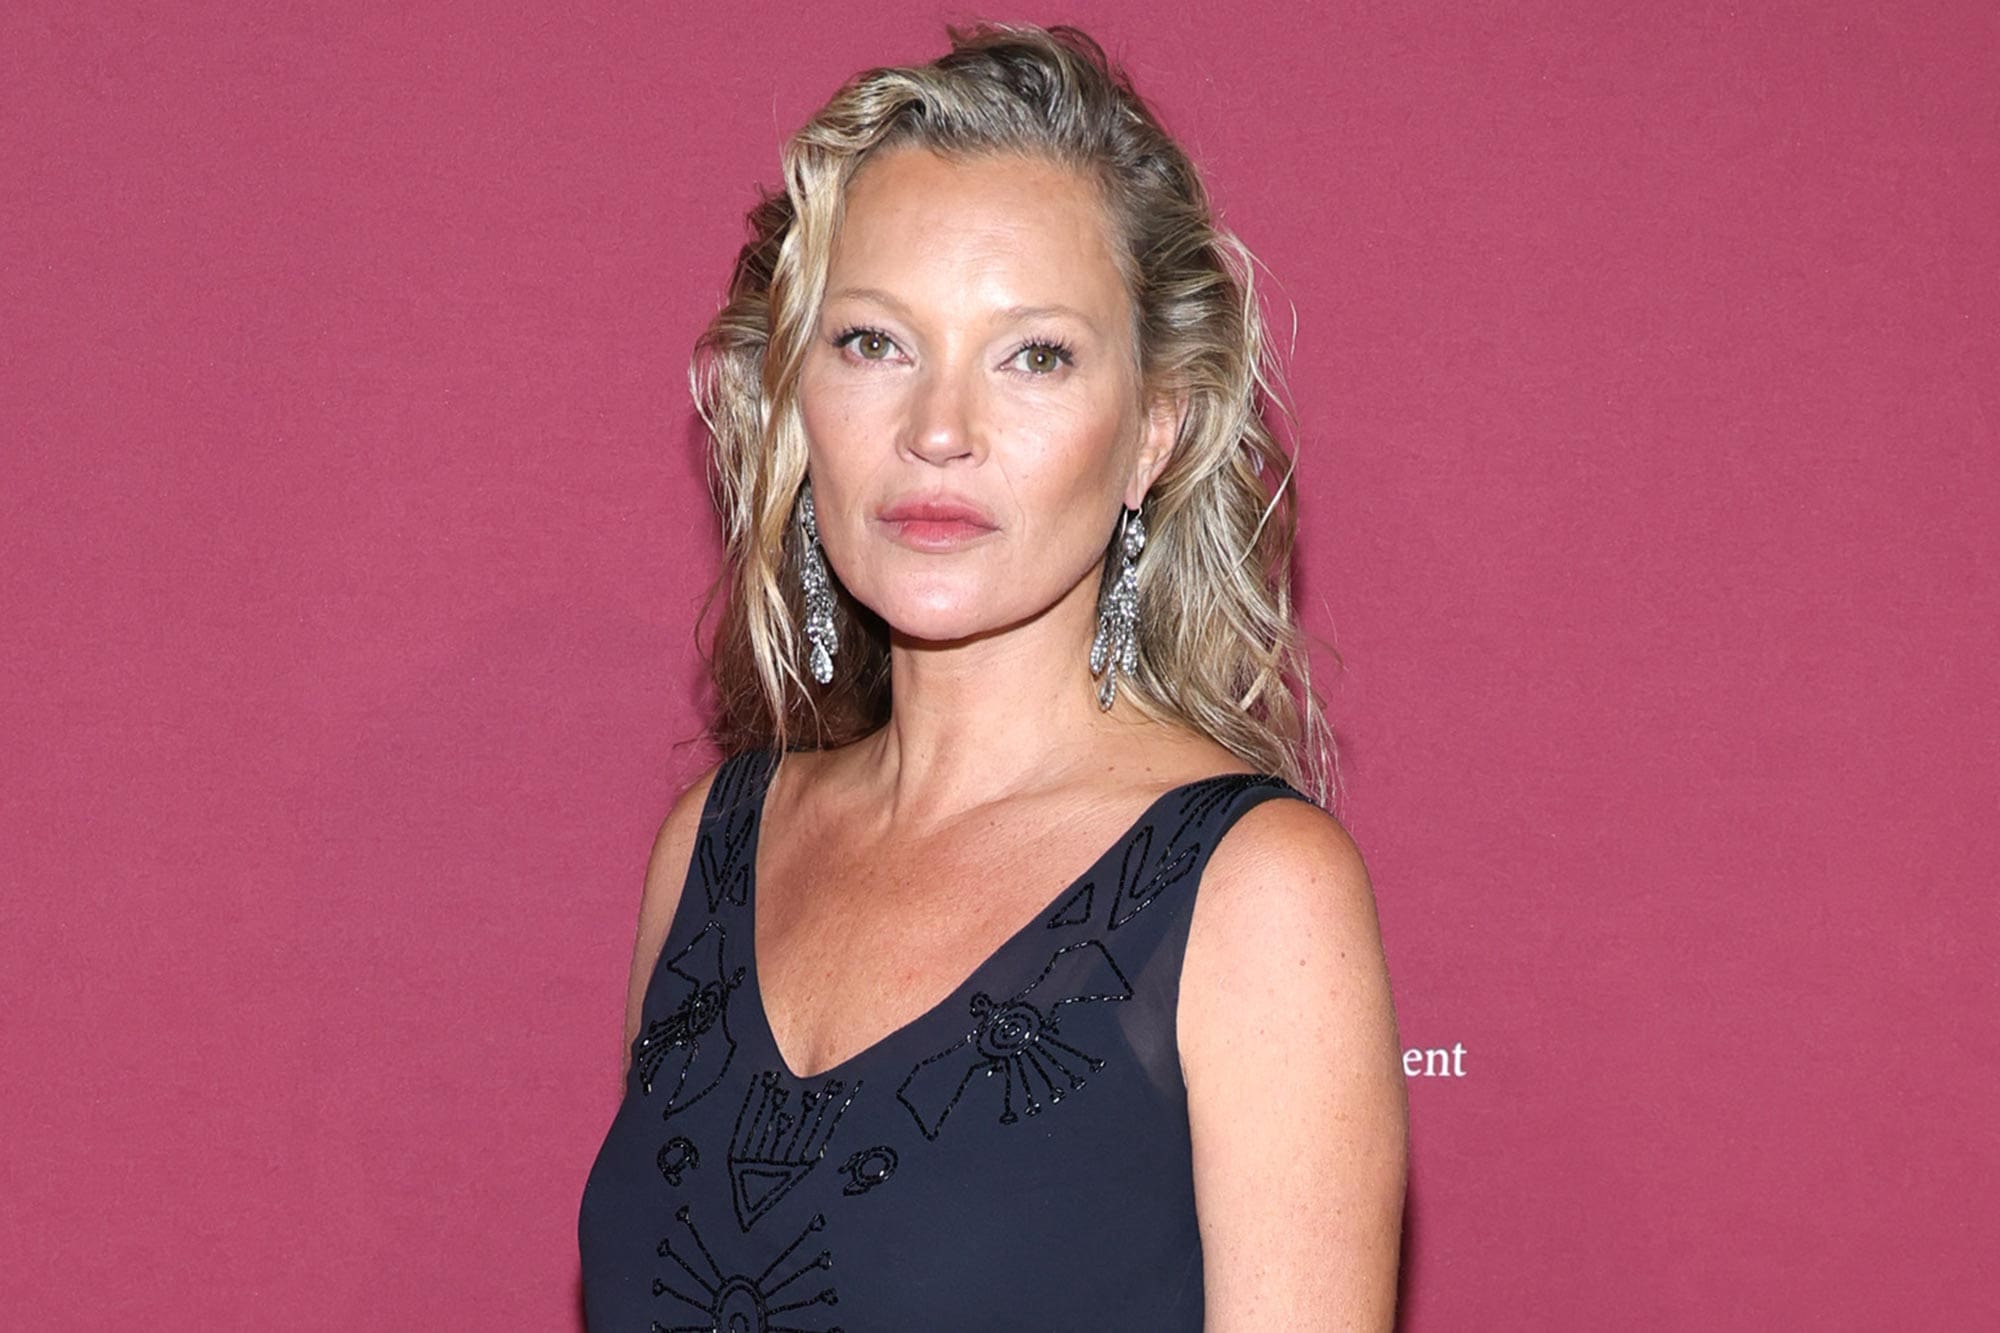 Kate Moss Speaks Up About Being Asked To Go Topless In A Photo shoot When She Was Underage